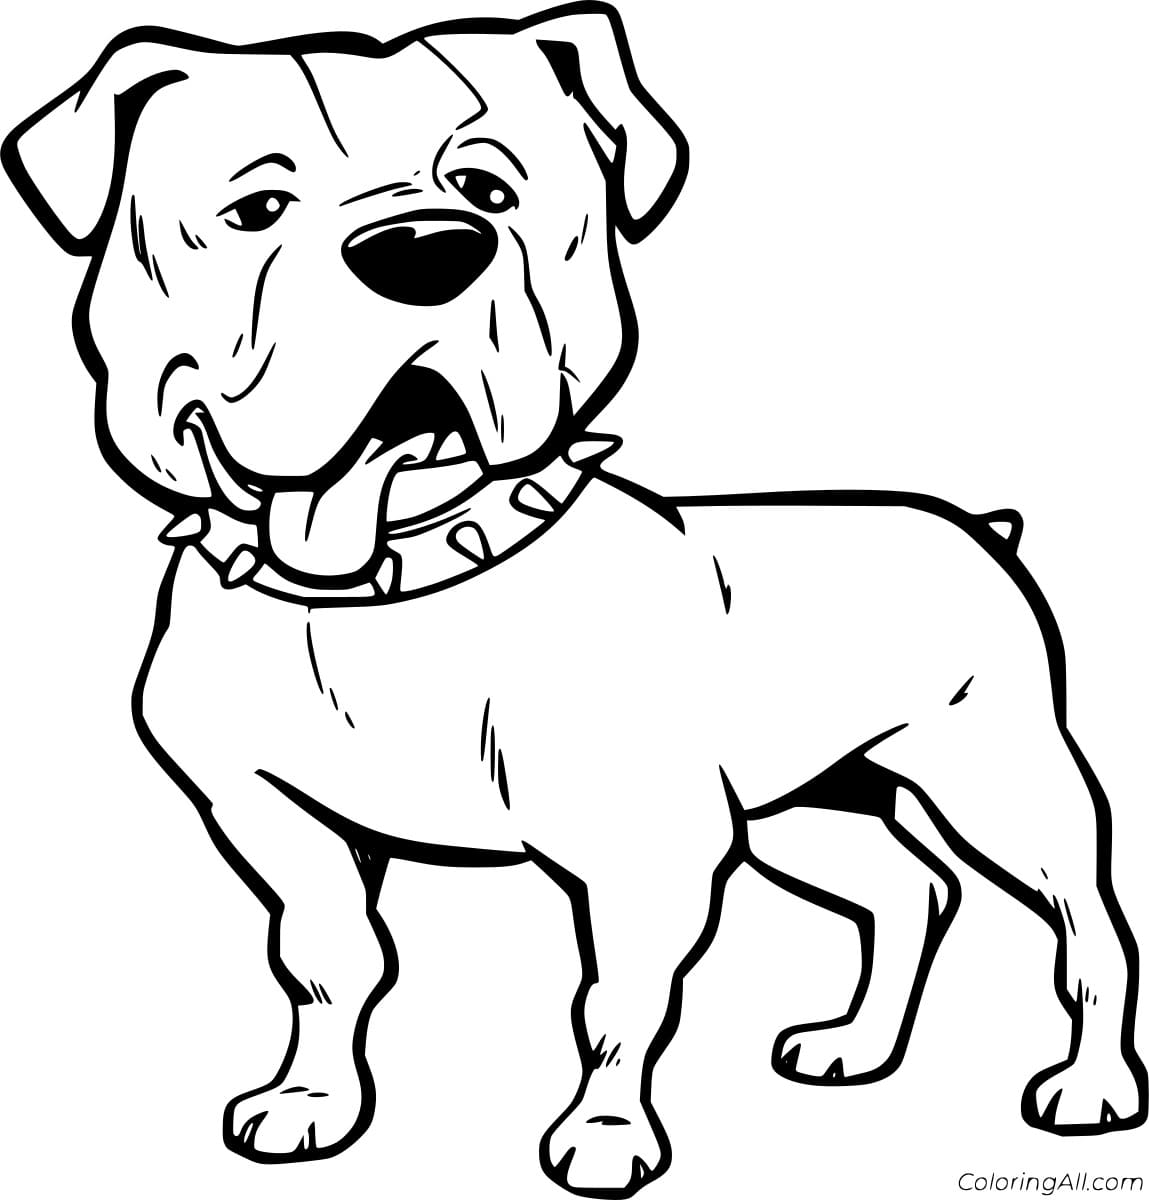 Bulldog With Collar Coloring Page